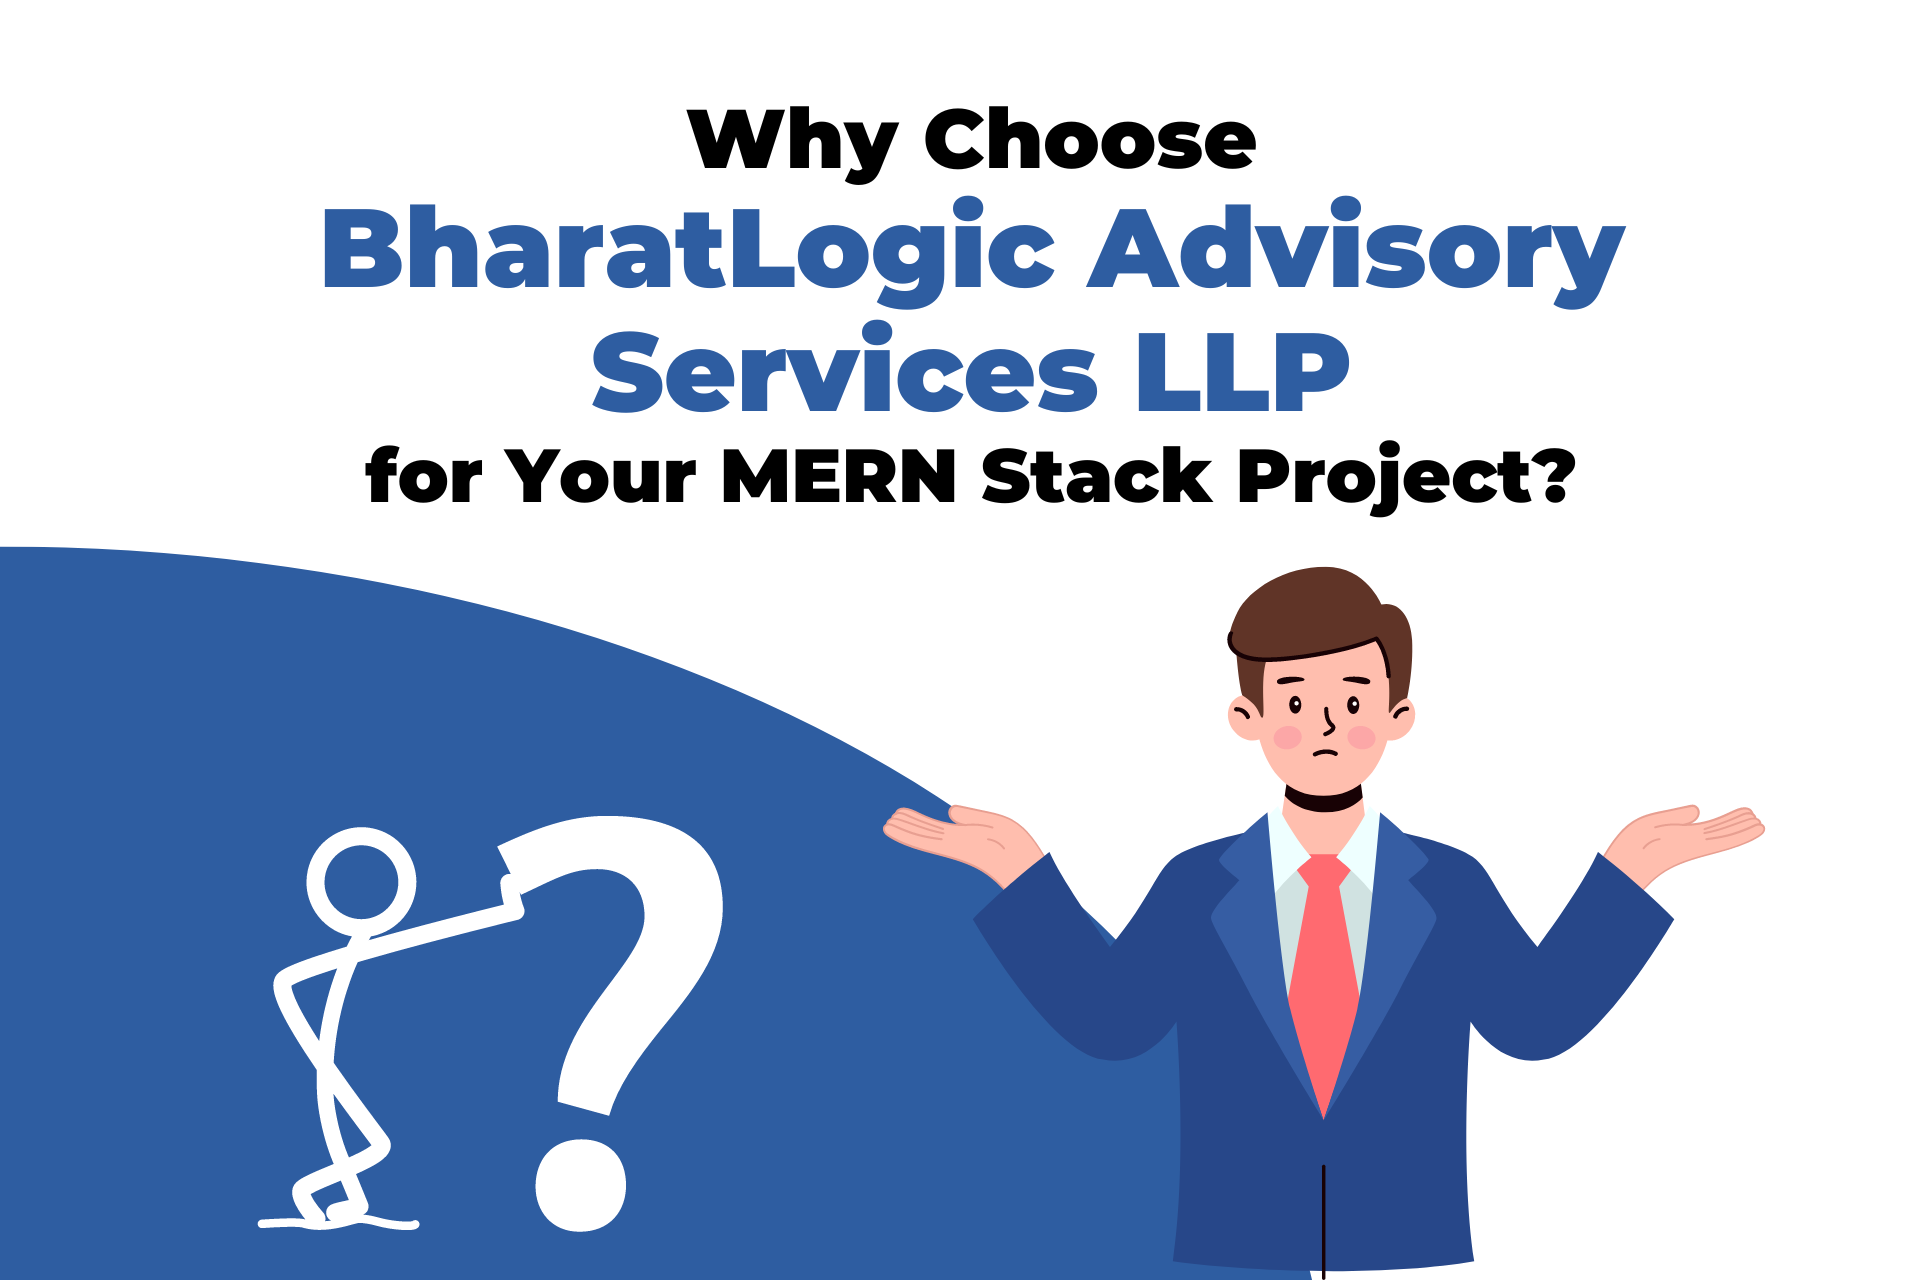 Why Choose BharatLogic Advisory Services LLP for Your MERN Stack Project?